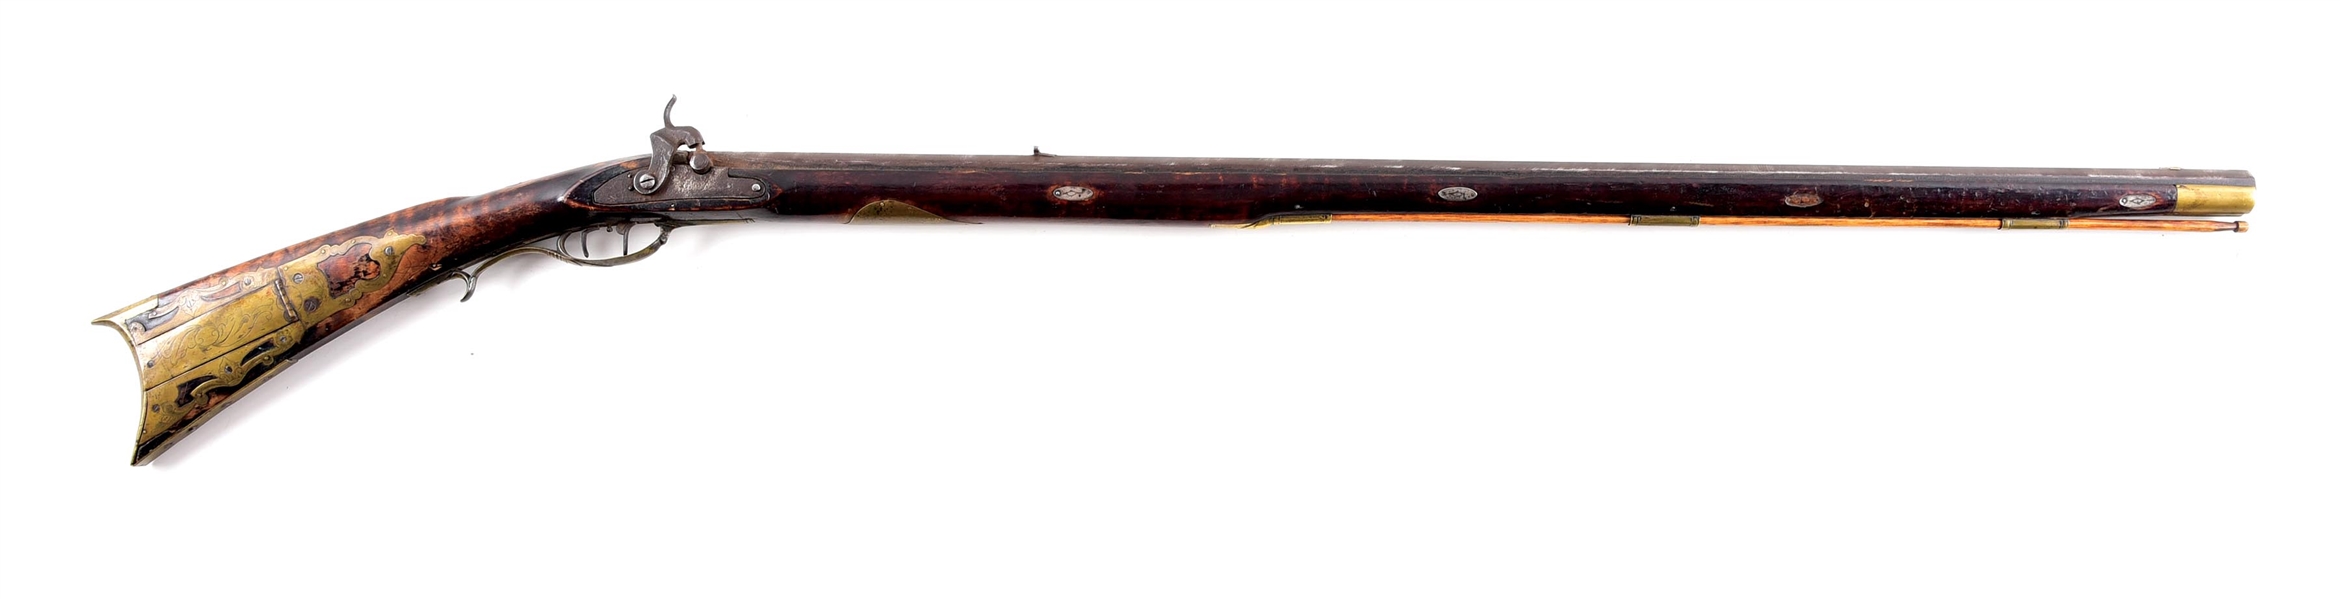 (A) GEORGE KETTERING PERCUSSION MUZZLE LOADING RIFLE.